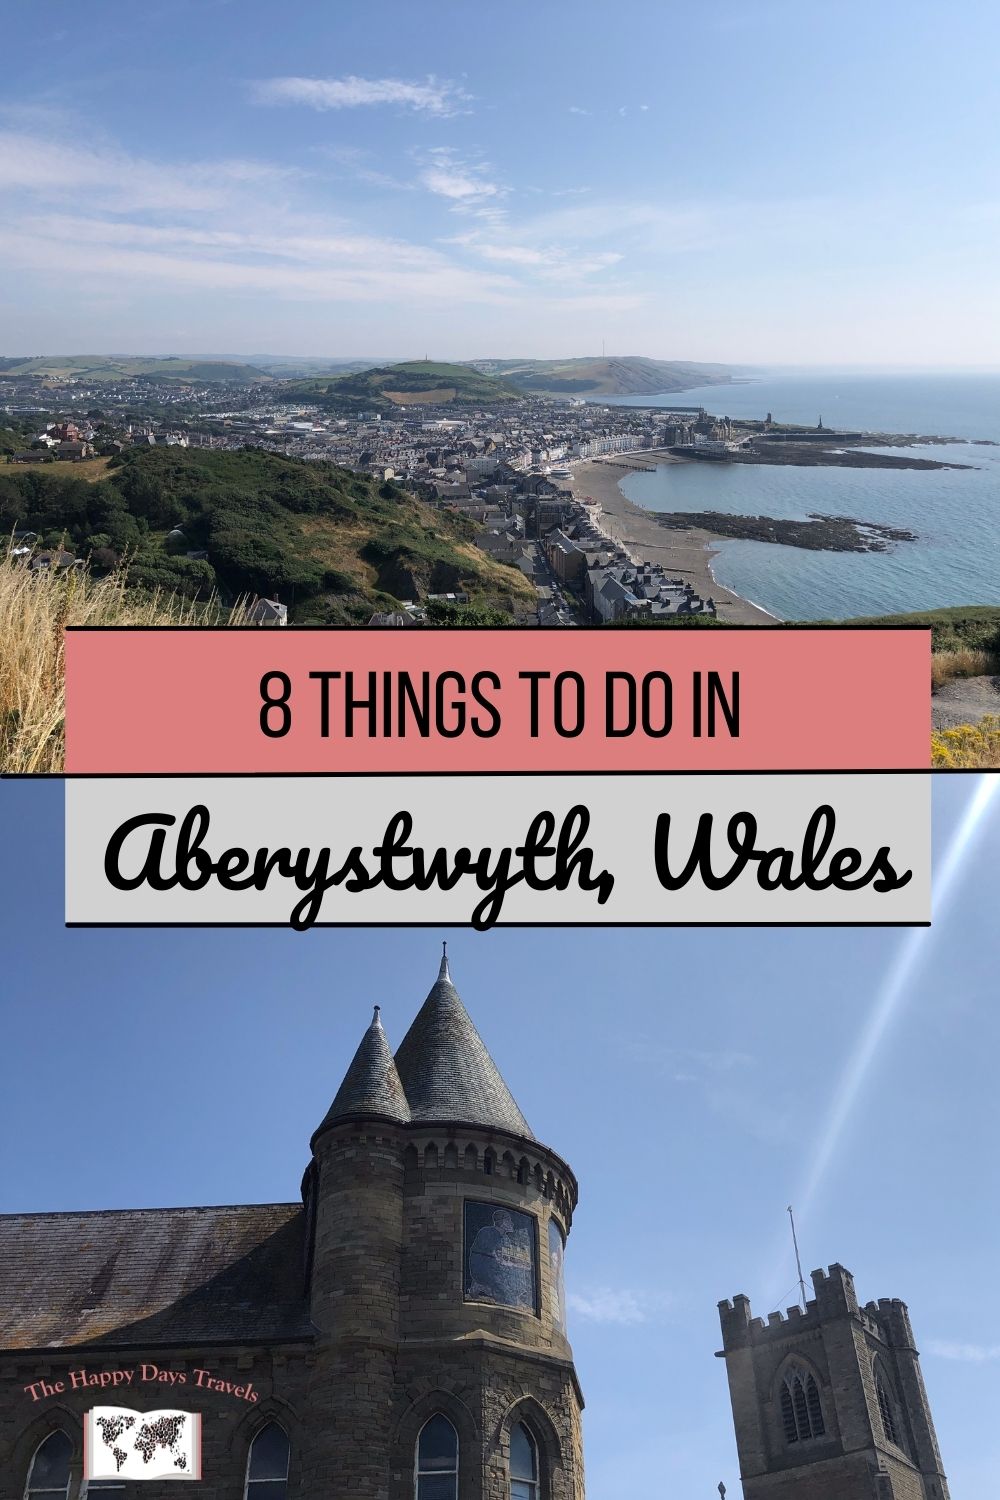 Pin image for '8 Things to do in Aberystwyth, Wales'. Top image shows view of Aberystwyth from Constitution Hill and bottom picture shows building of Aberystwyth University.